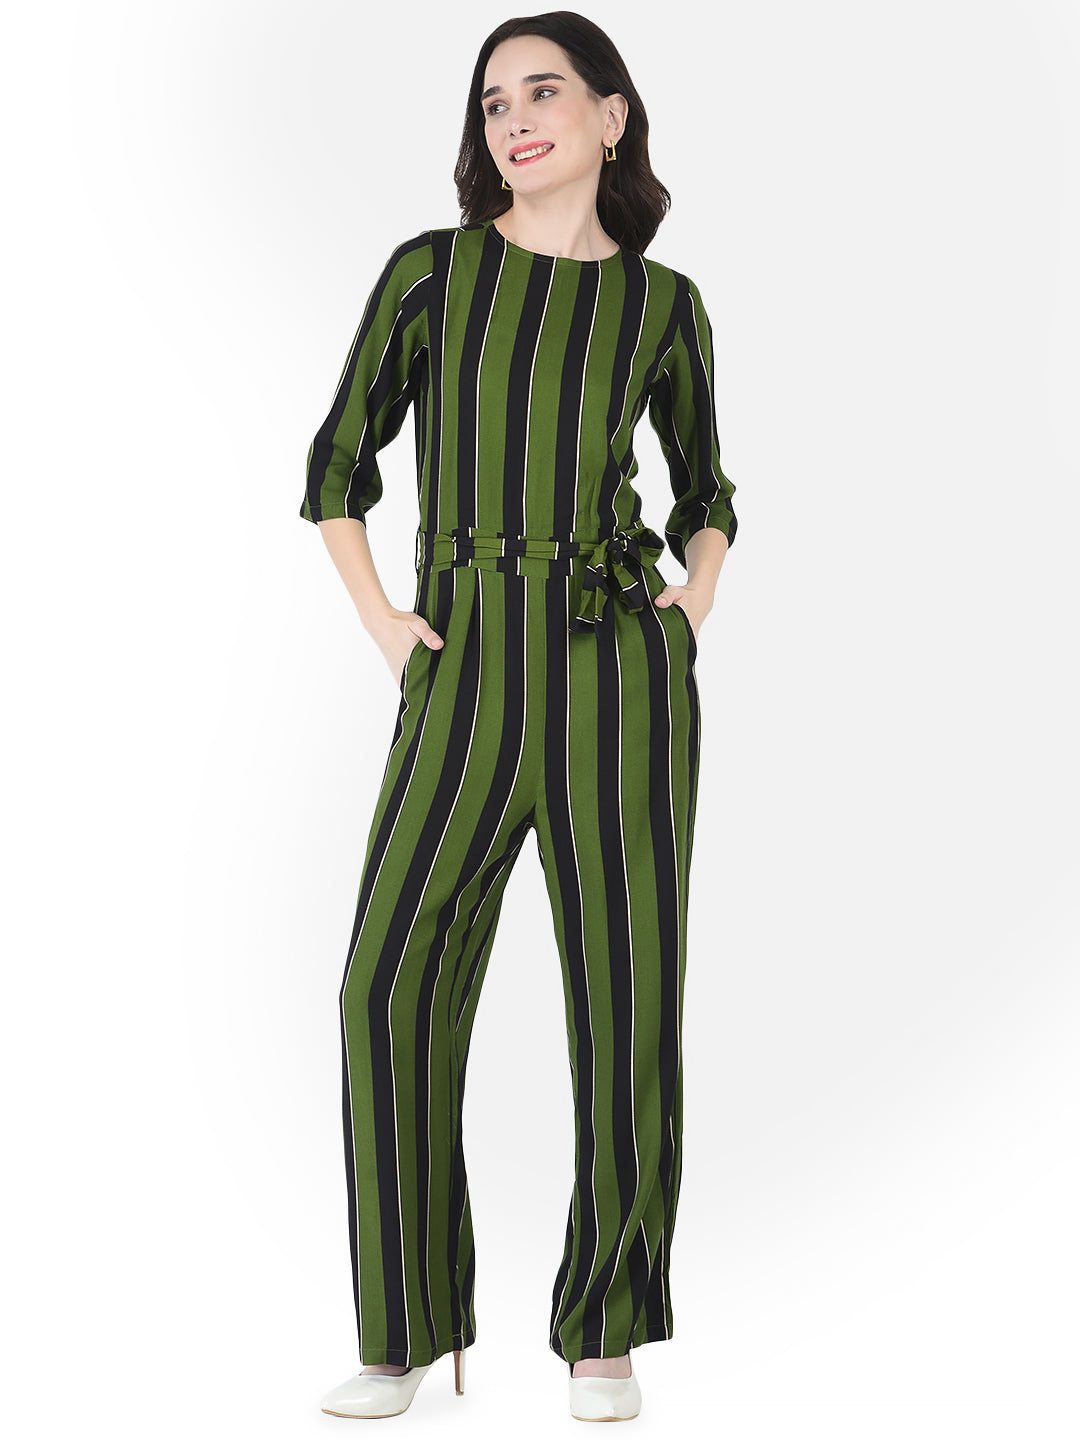 Green Striped Jumpsuit - Women Dungarees